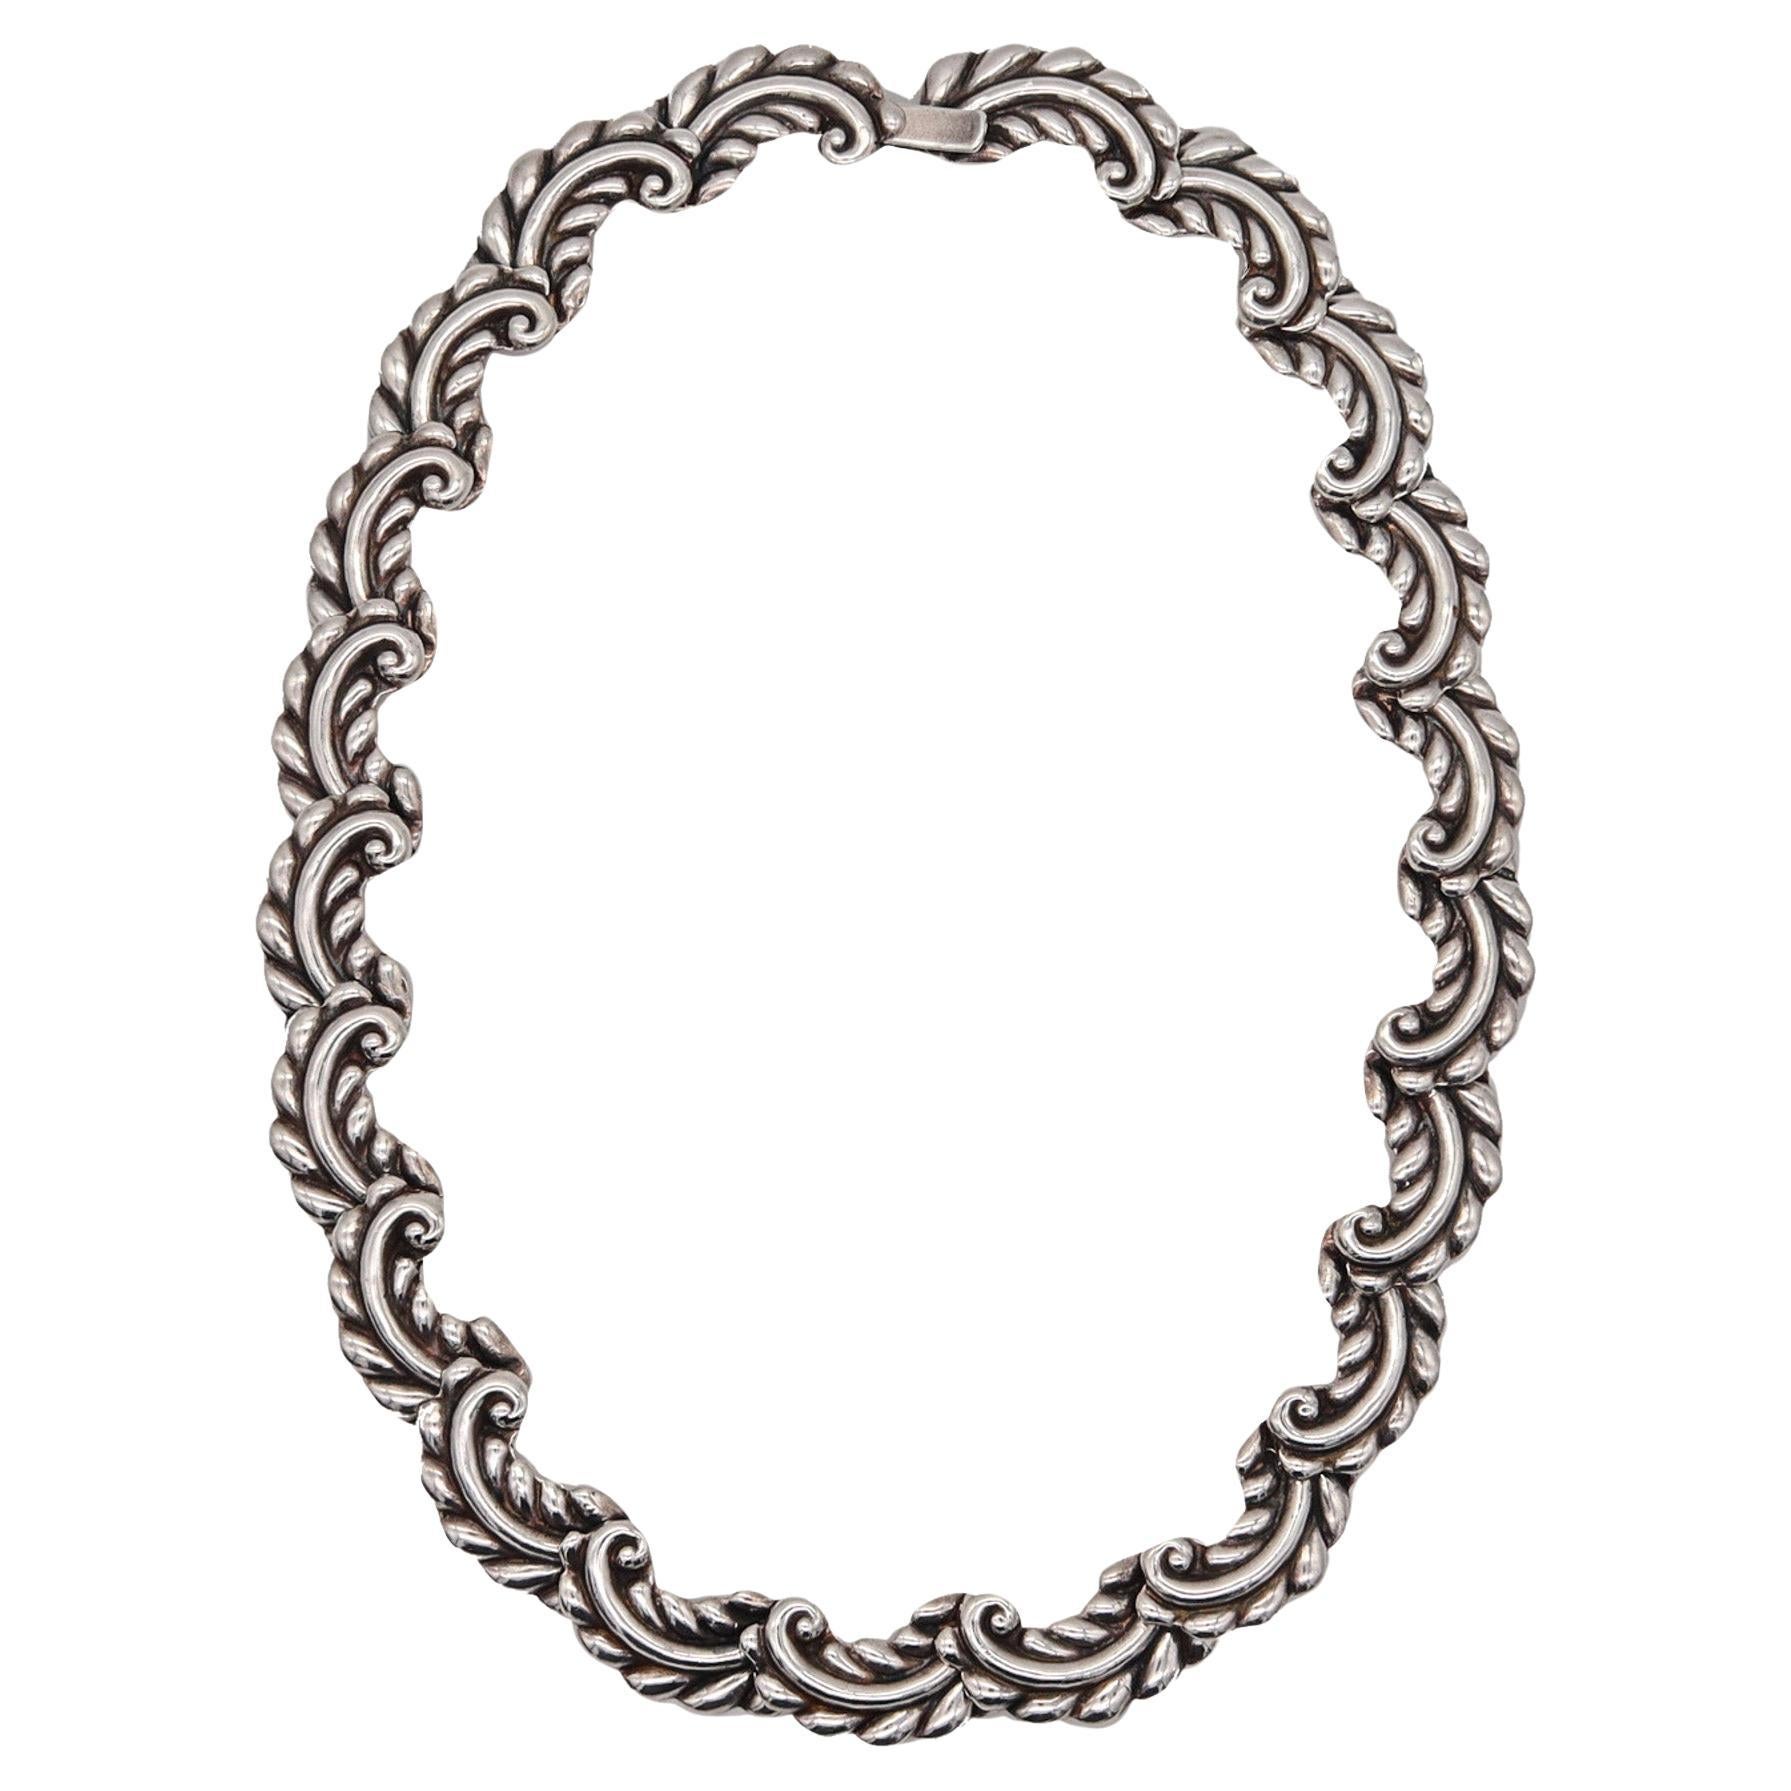 Antonio Reina 1950 Mexican Taxco Organic Necklace In Solid .925 Sterling Silver For Sale